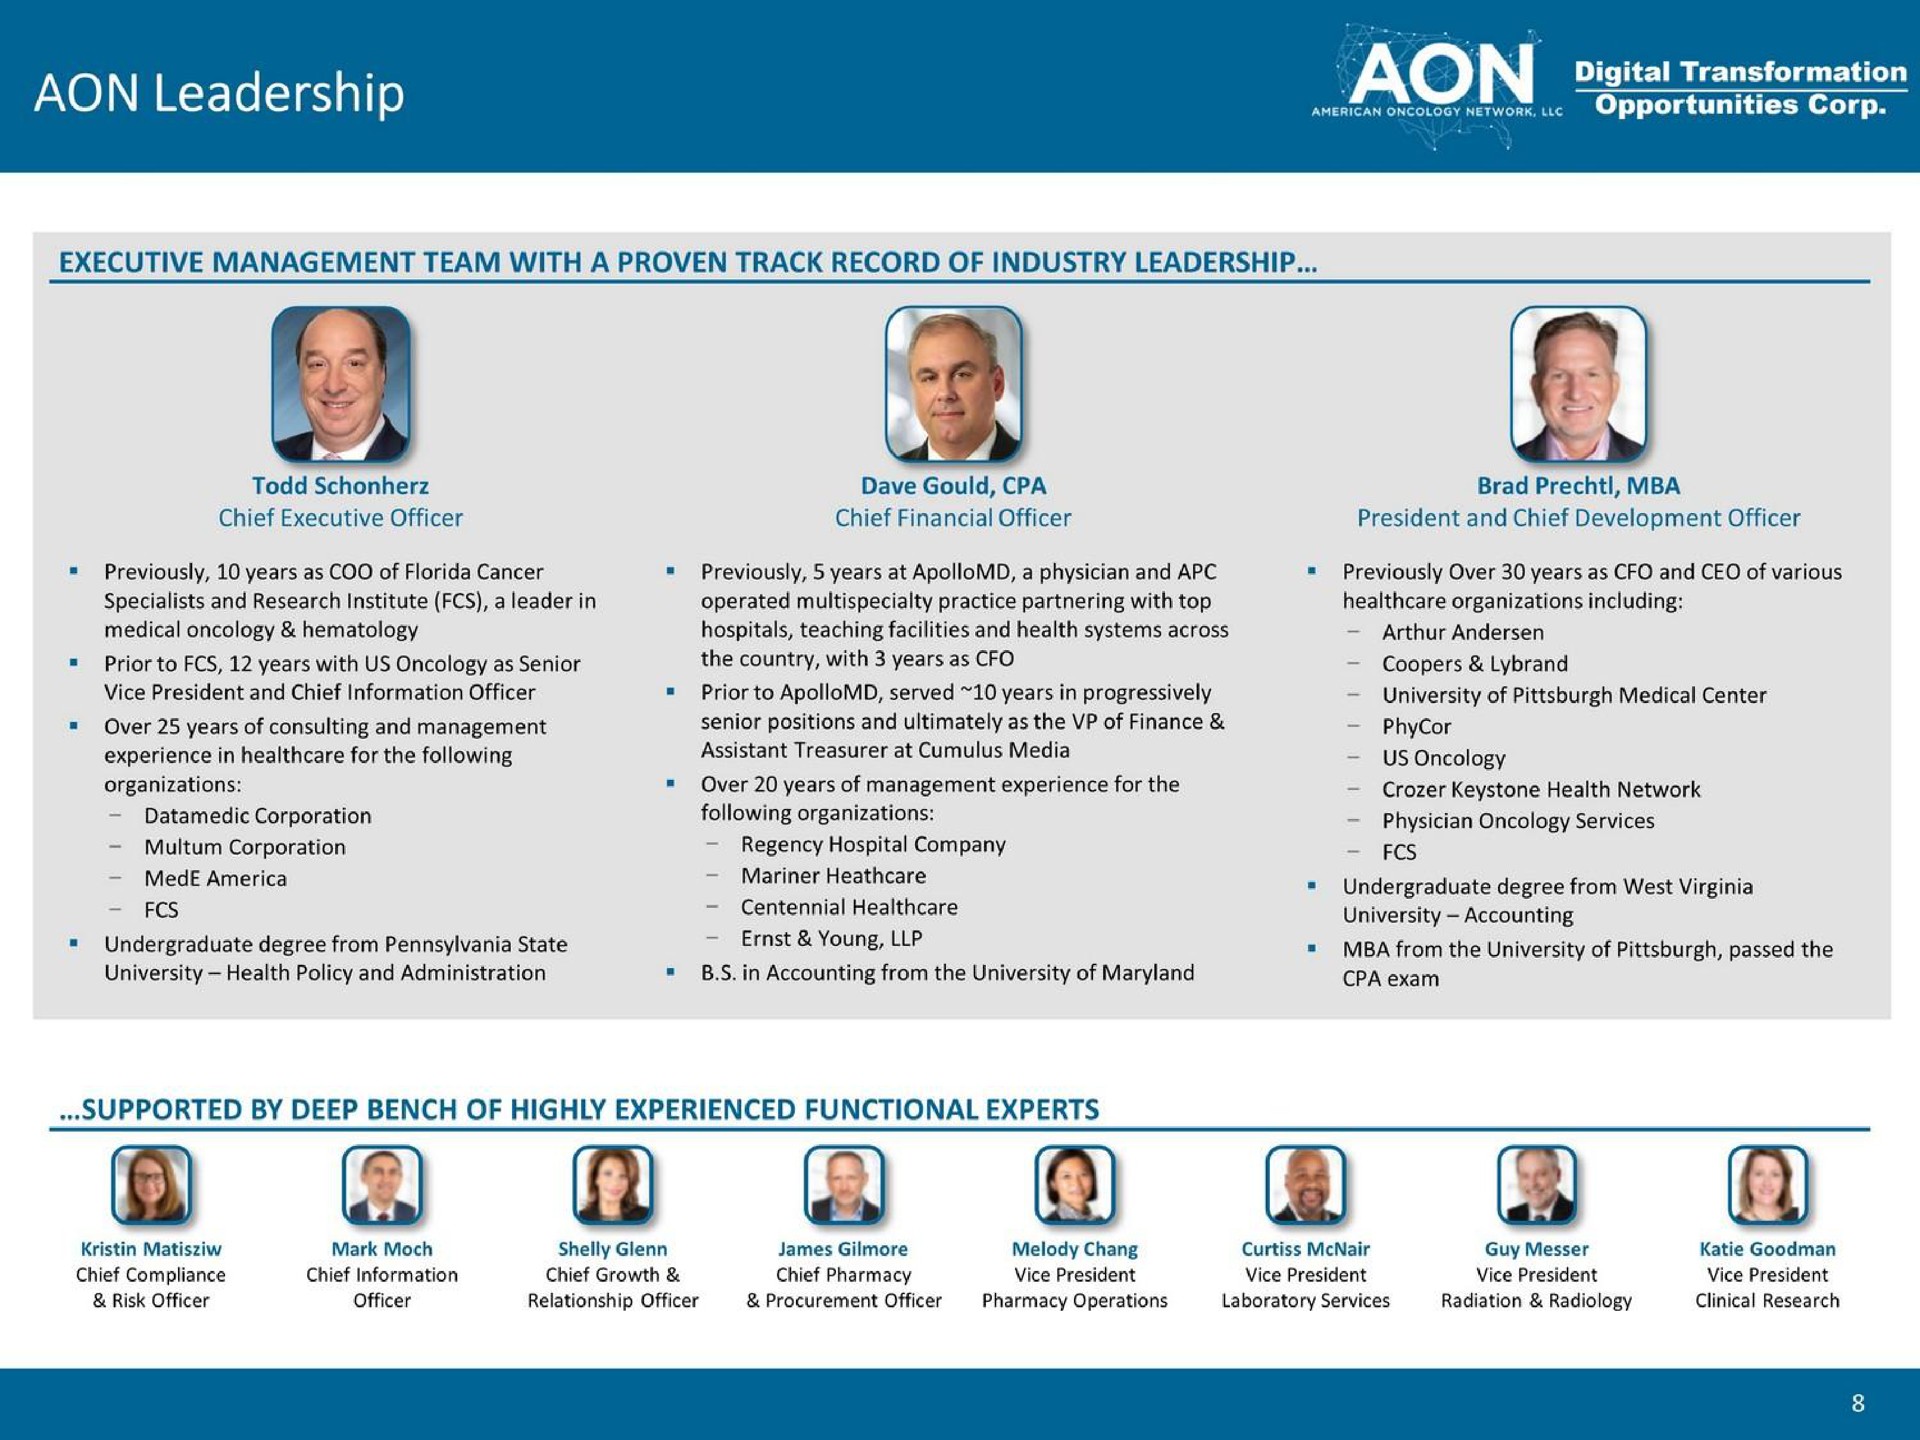 leadership teal a | American Oncology Network